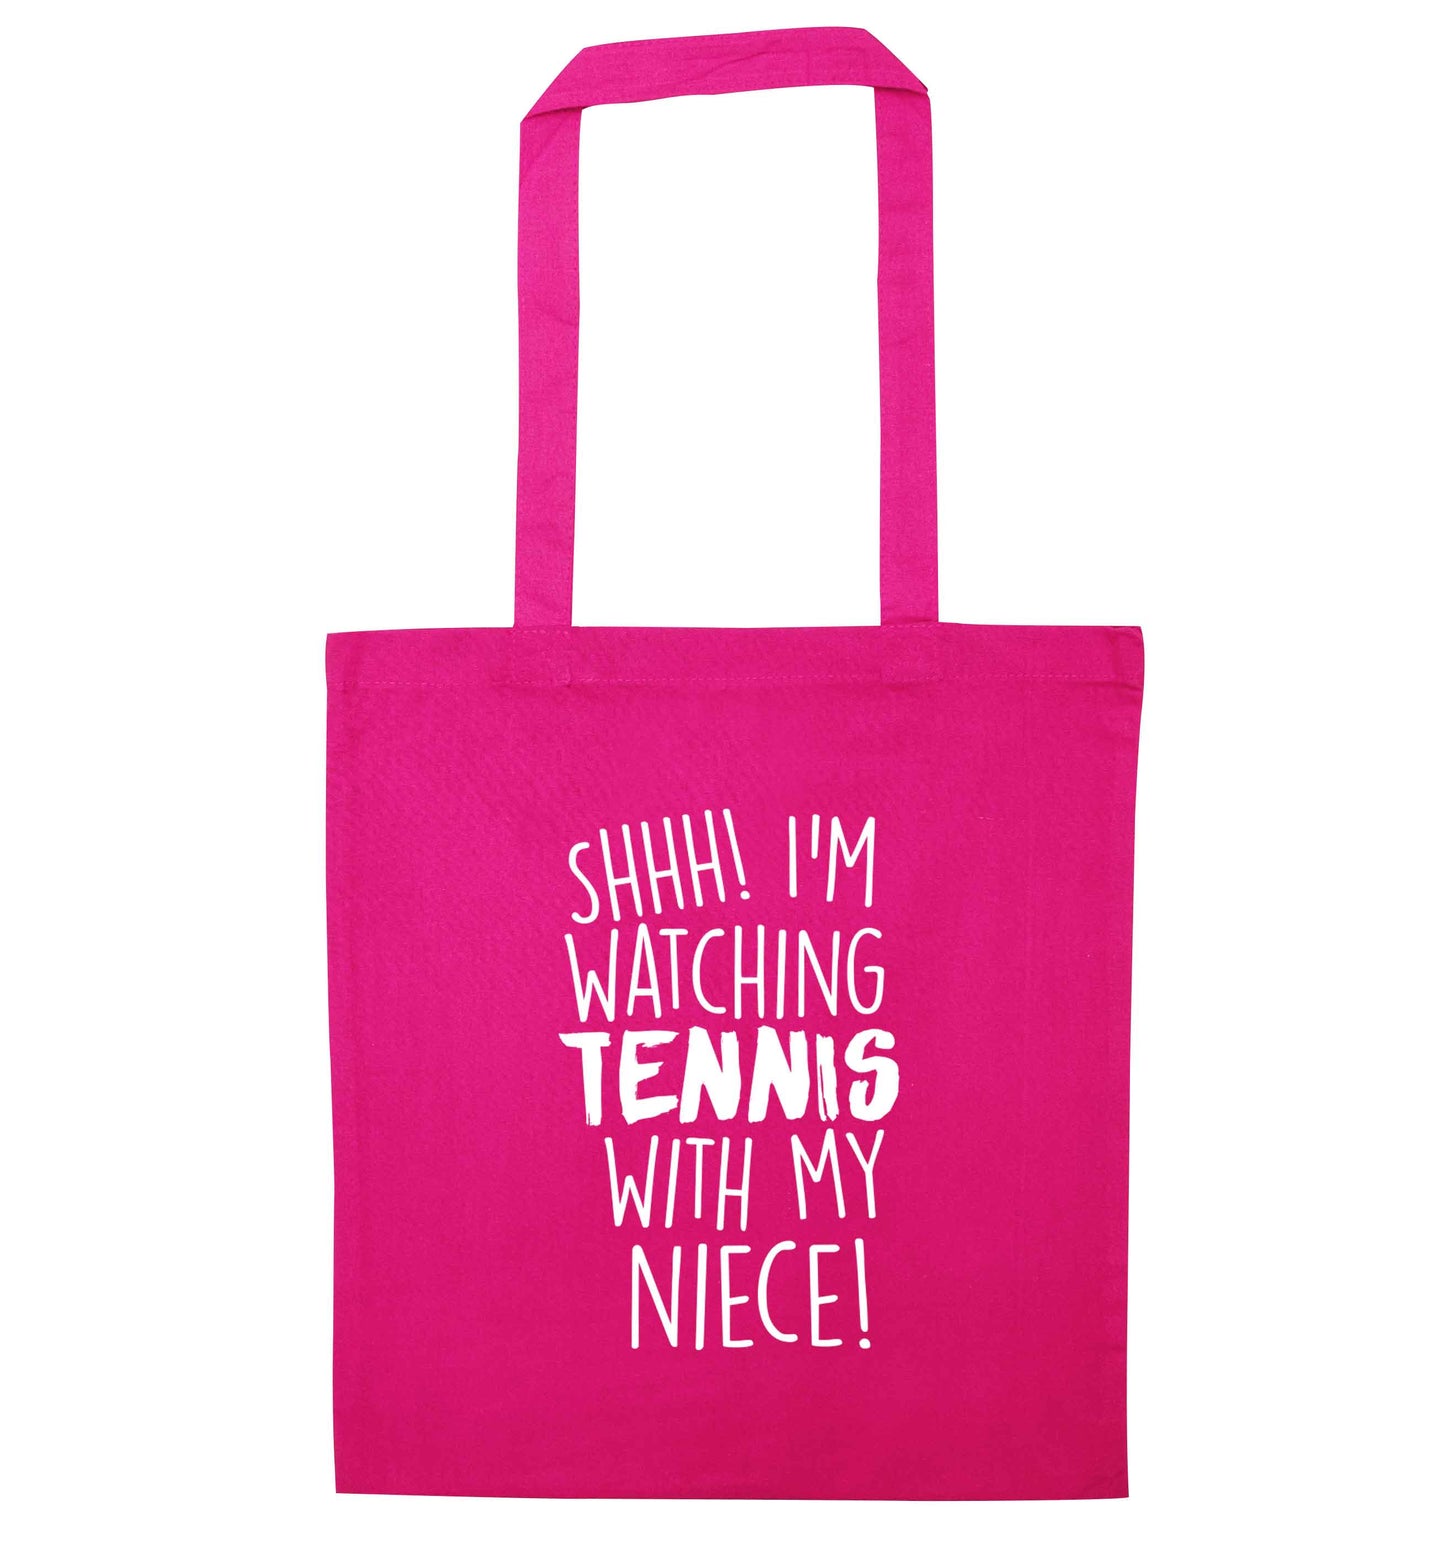 Shh! I'm watching tennis with my niece! pink tote bag